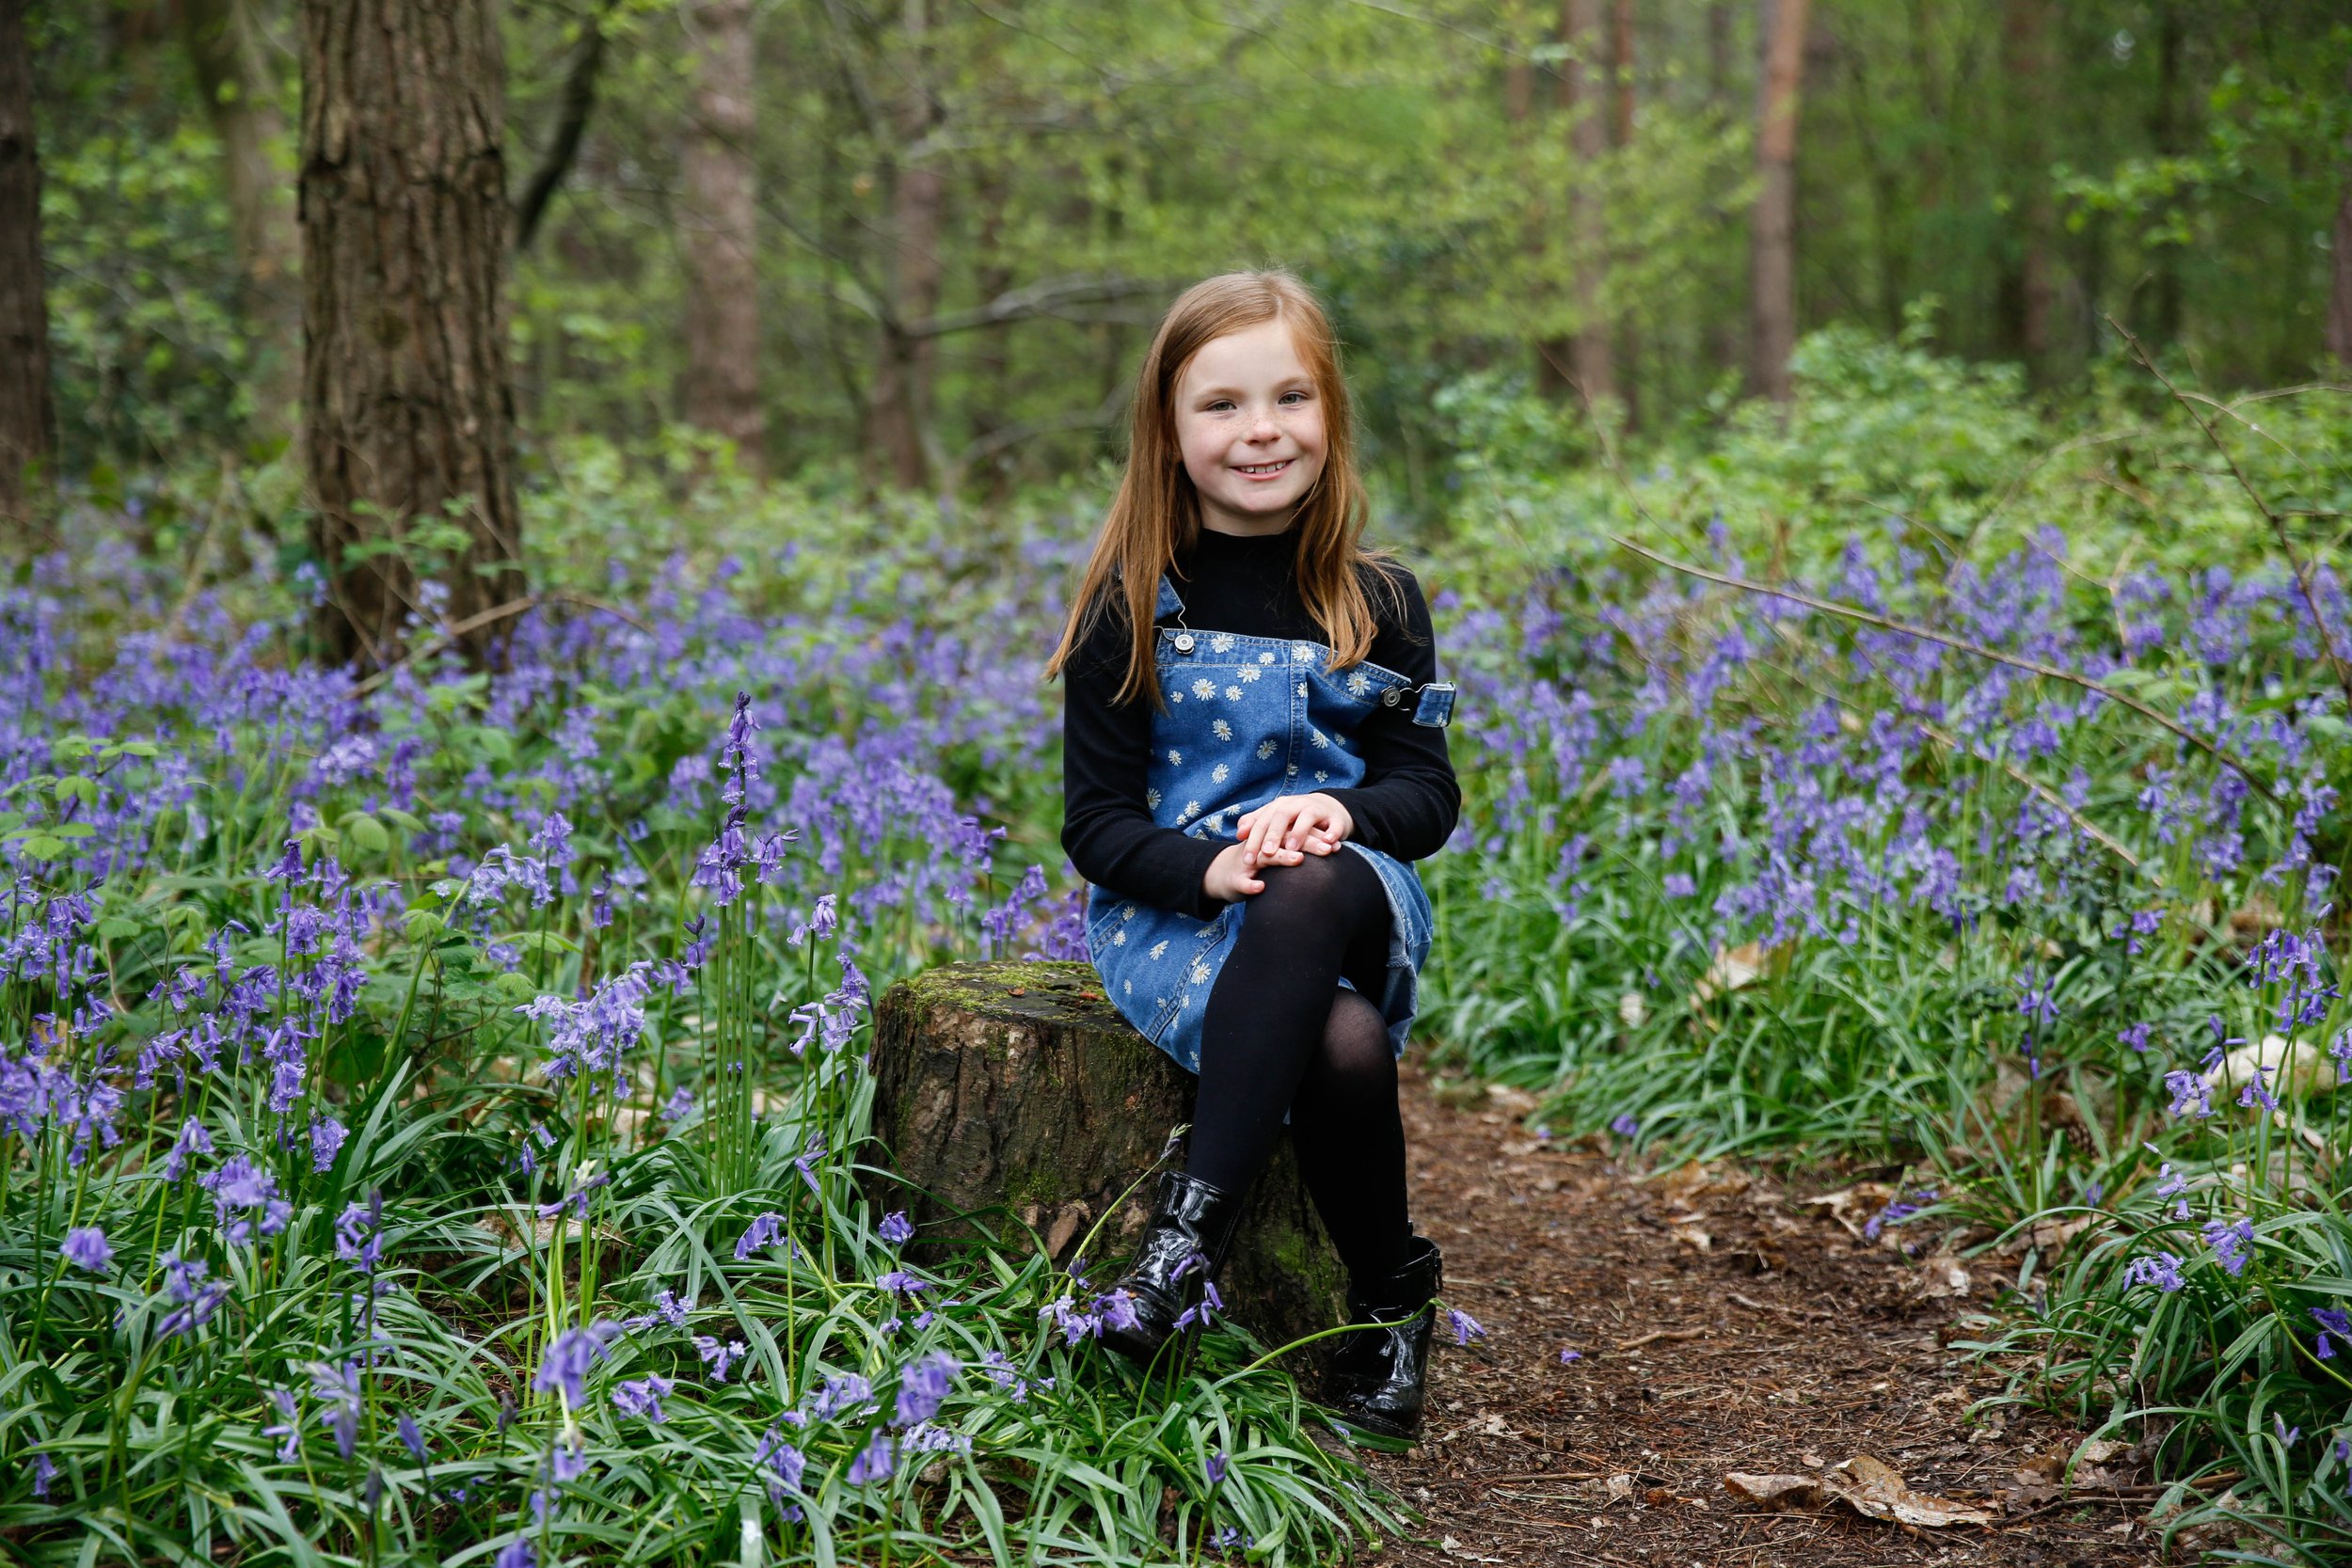 MUM AND DAUGHTER PHOTO SHOOT IN THE BLUEBELLS | BERKSHIRE PORTRAIT SHOOTS07 choice .JPG